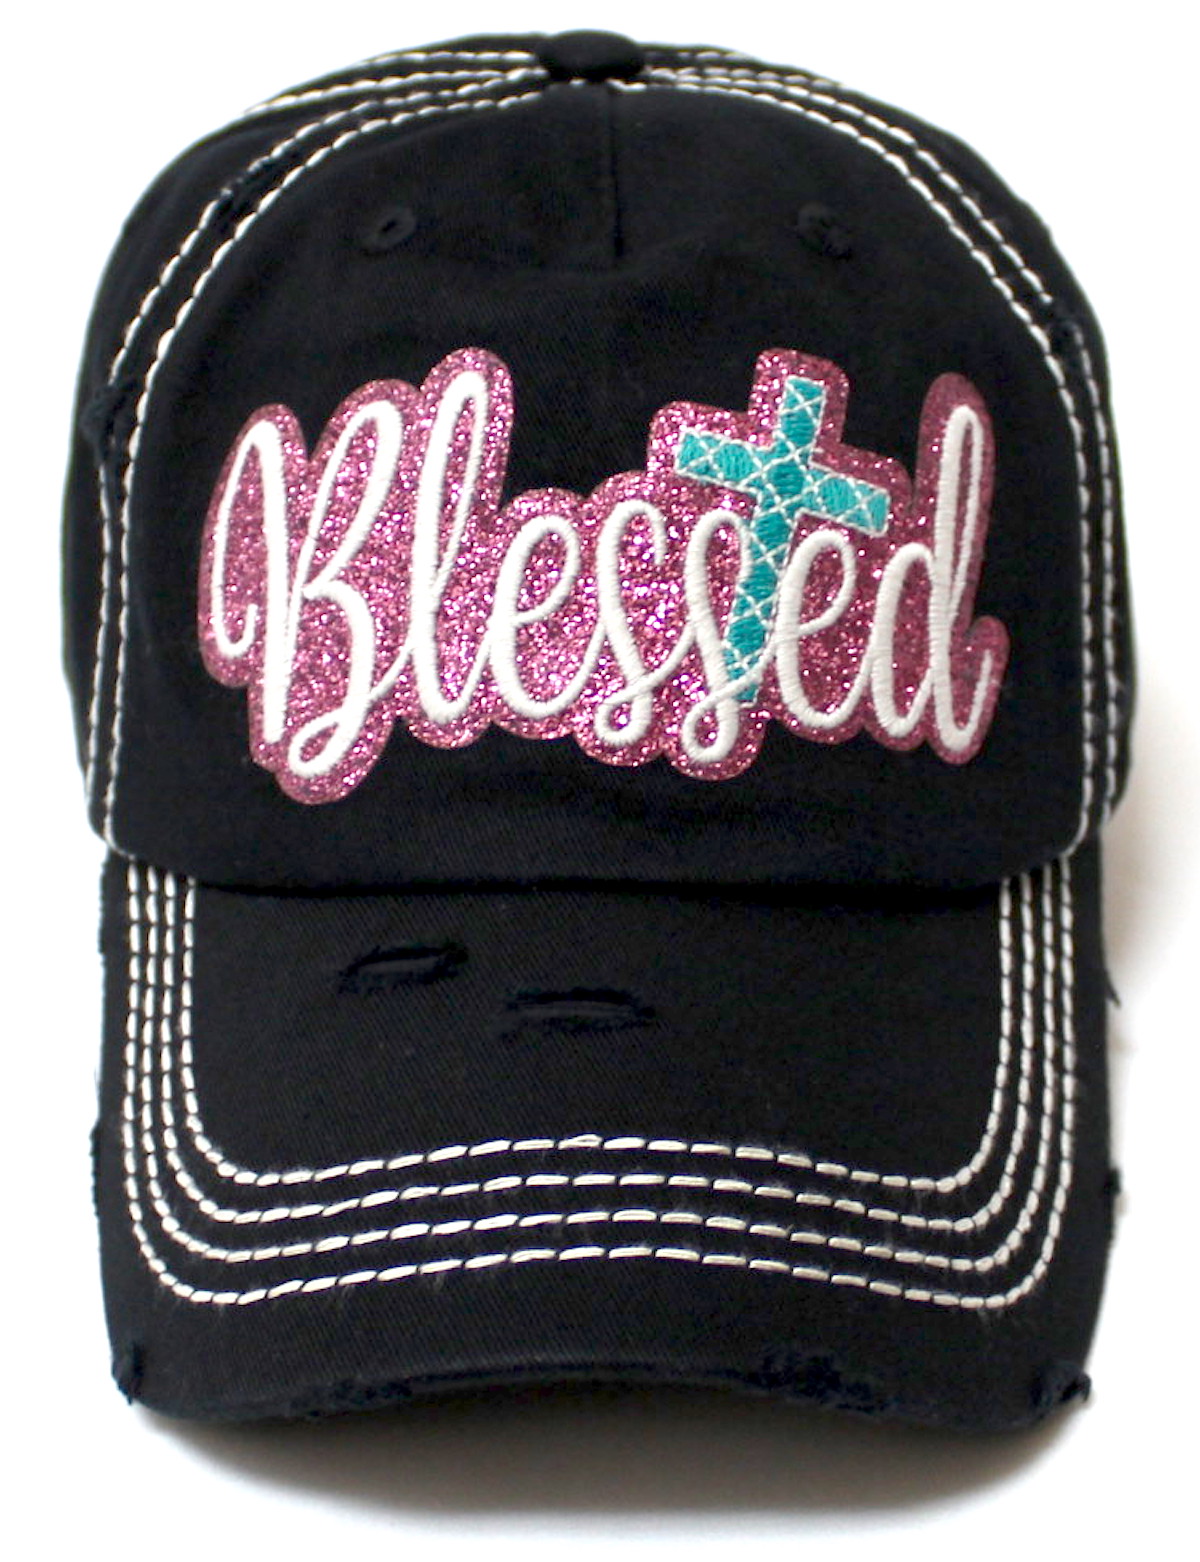 GlitterBlessed_Bla_Front